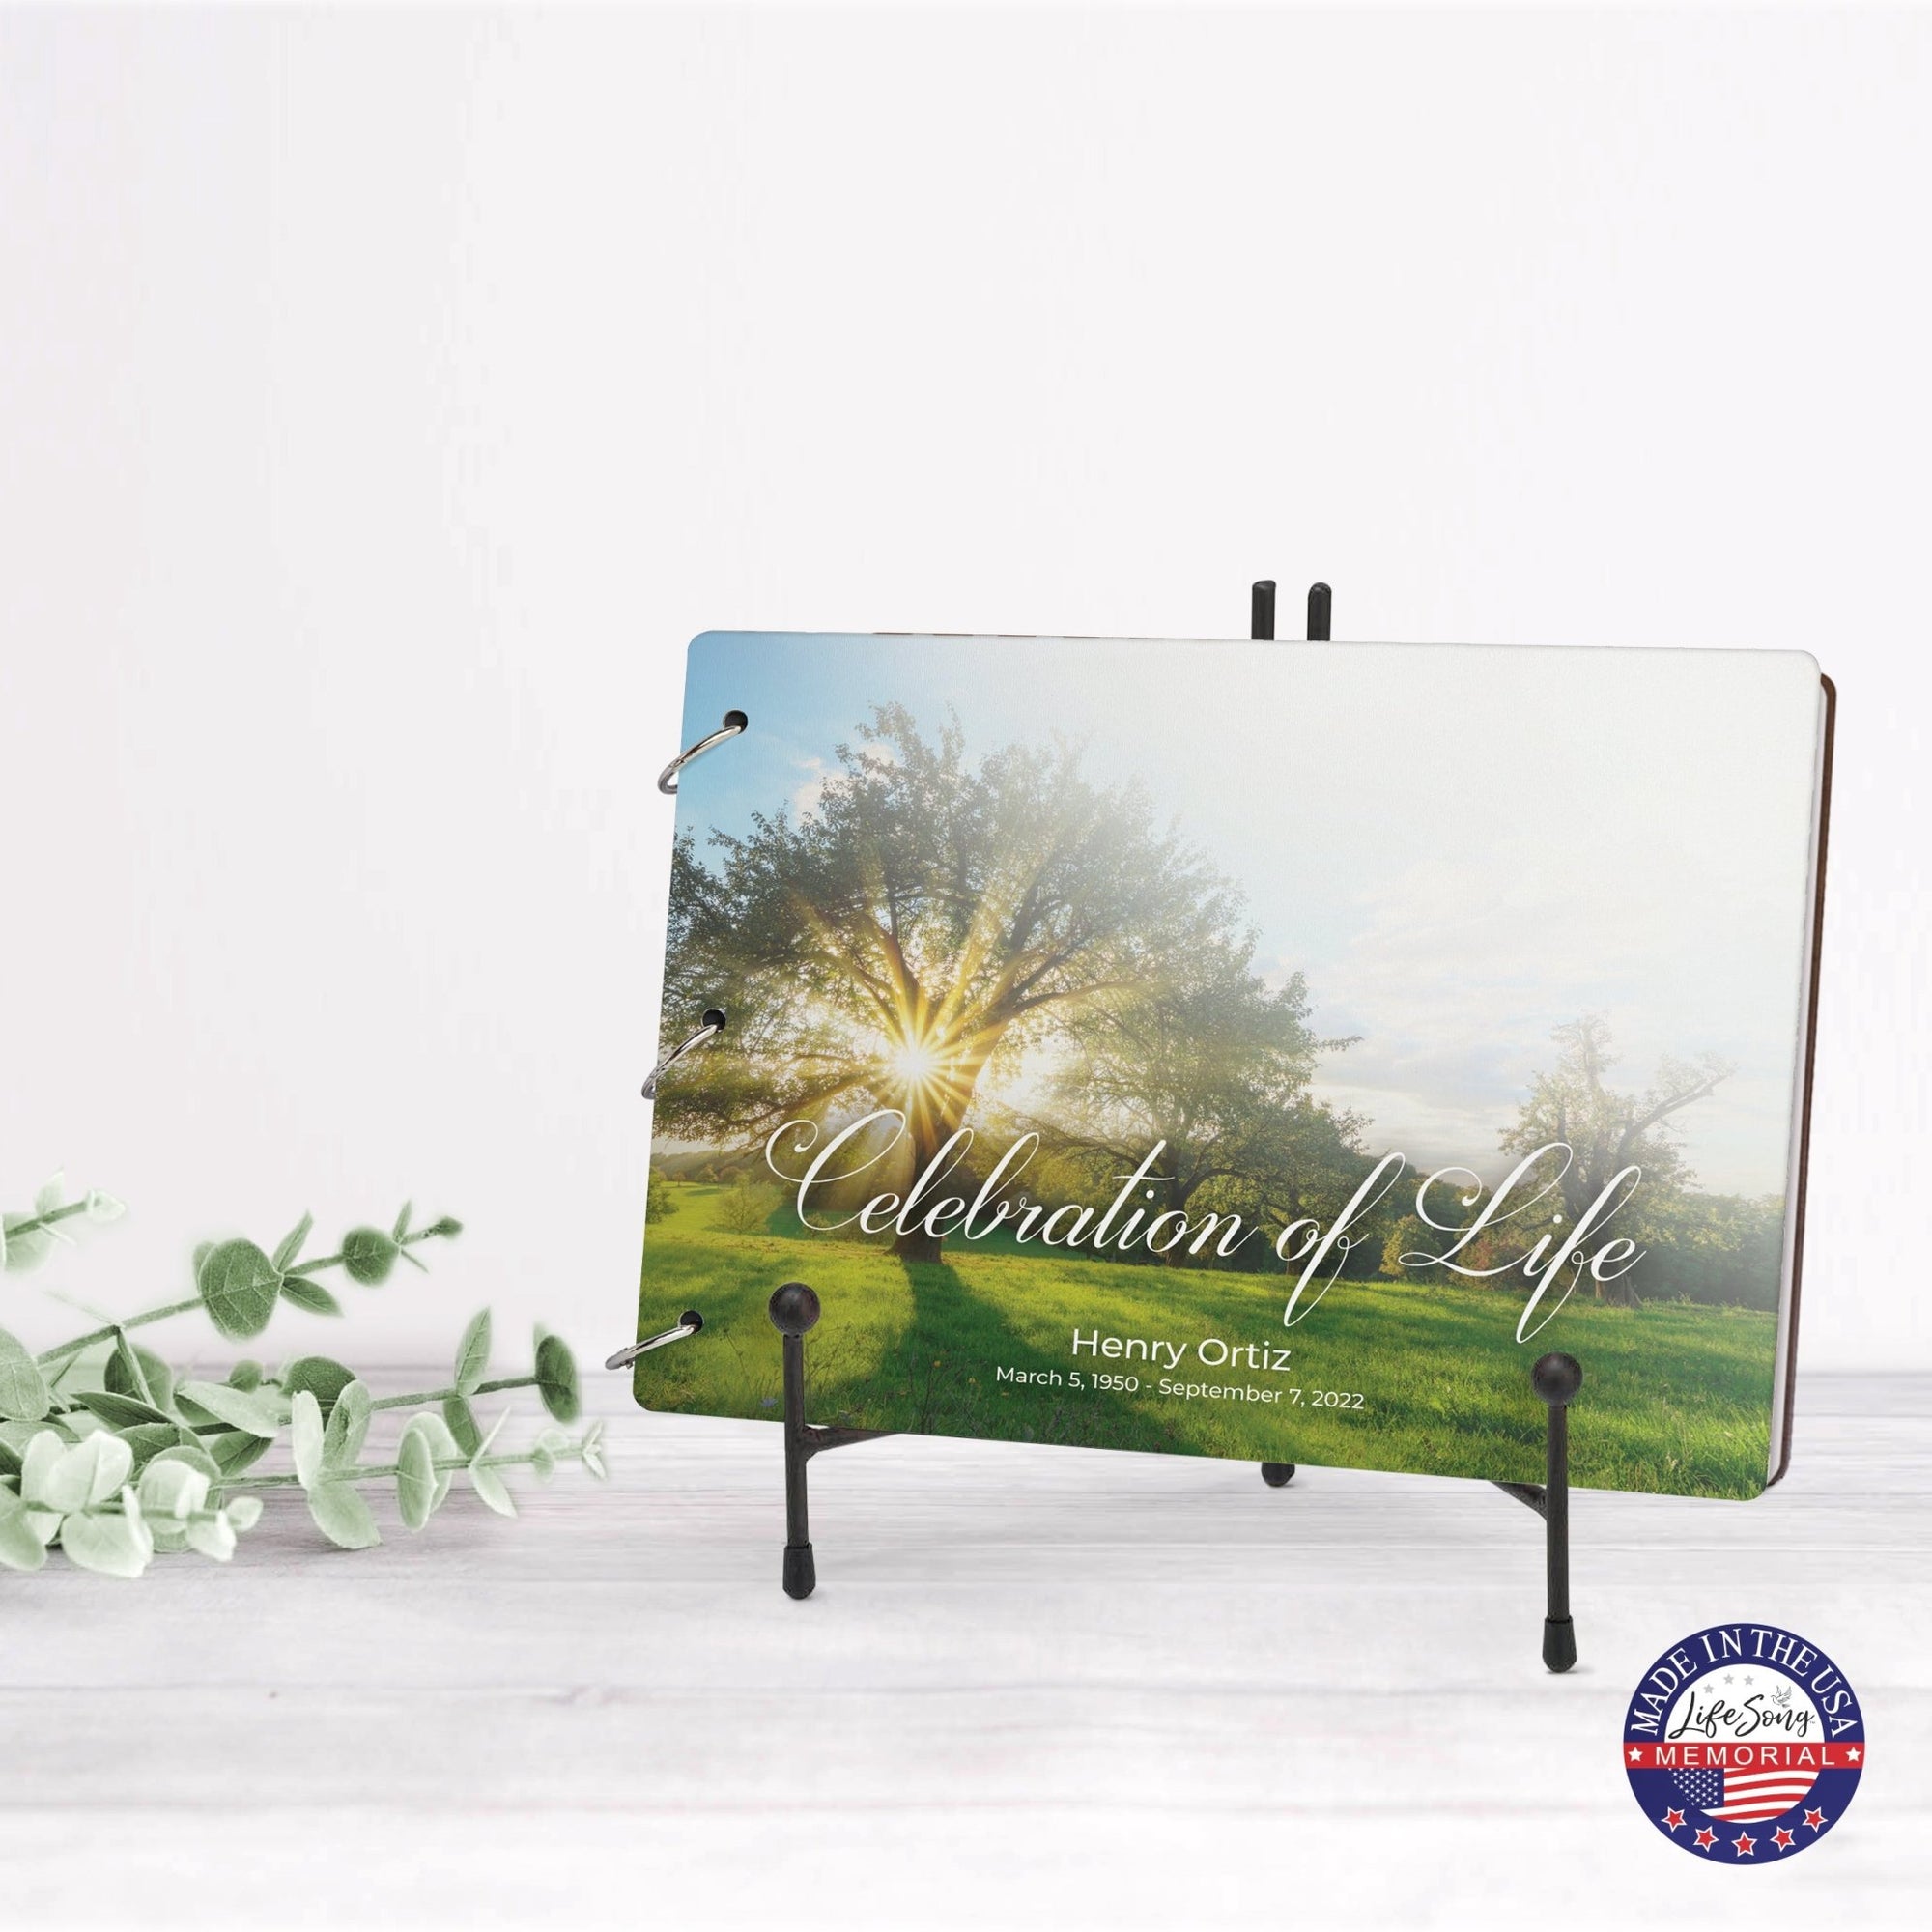 Personalized Celebration Of Life Funeral Guest Books For Memorial Services Registry With Wooden Cover - A Celebration Of Life - LifeSong Milestones